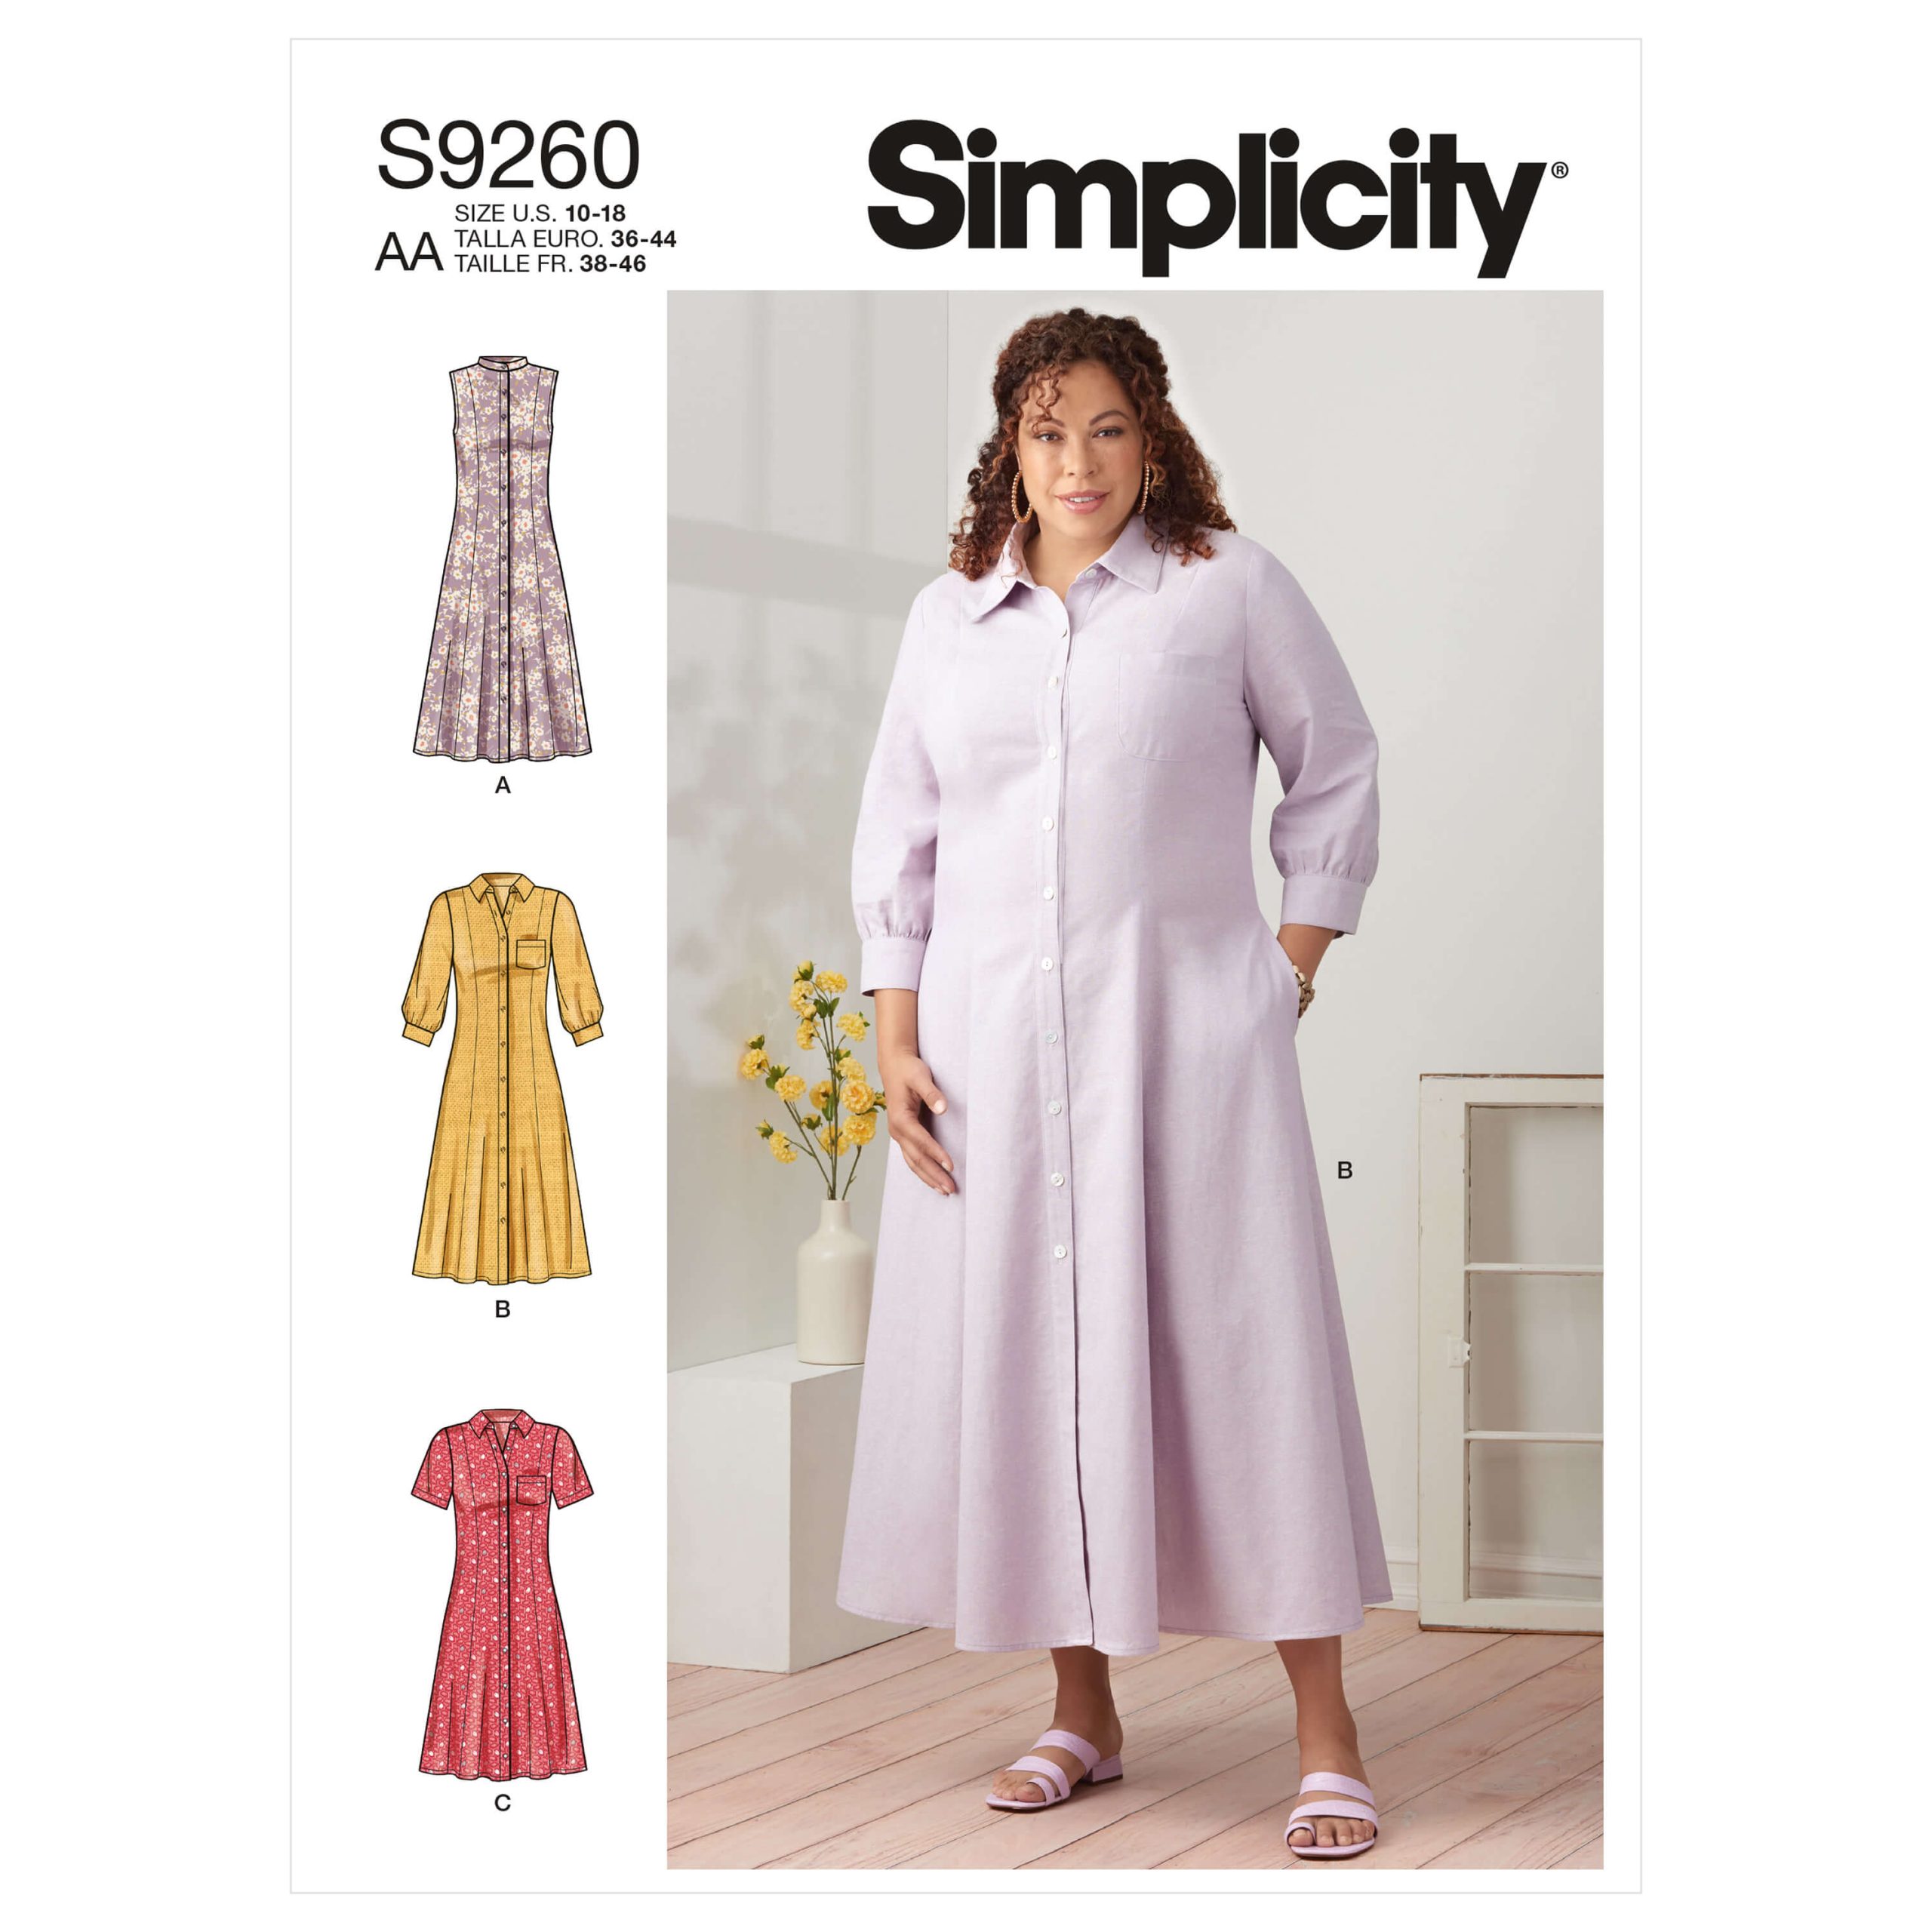 Simplicity Sewing Pattern S9260 Misses' and Women's Button Front Dresses